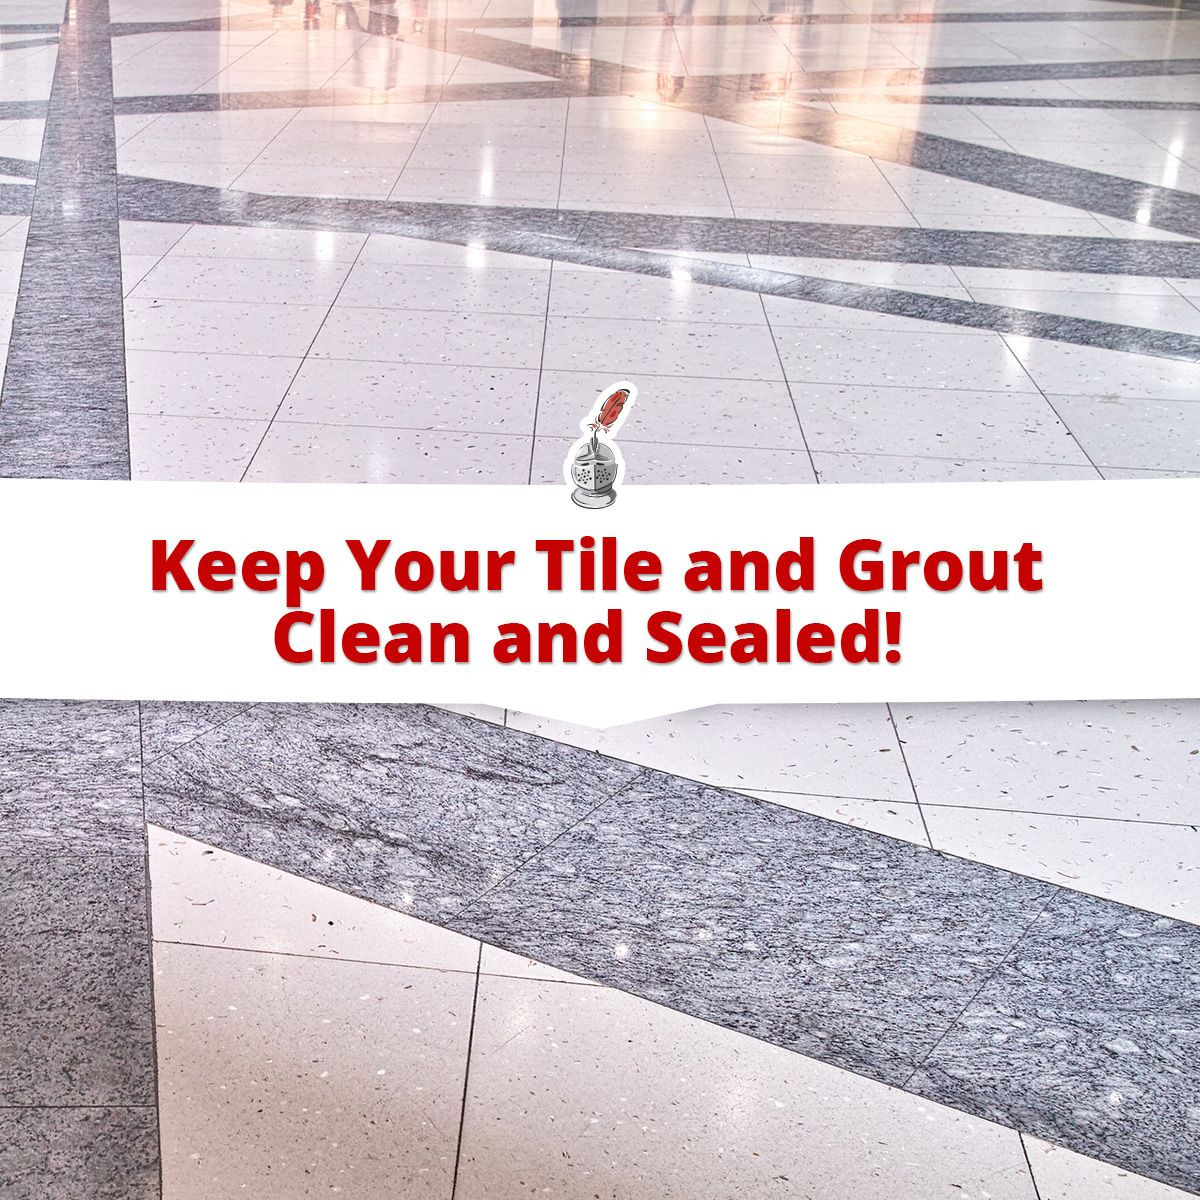 Keep Your Tile and Grout Clean and Sealed!